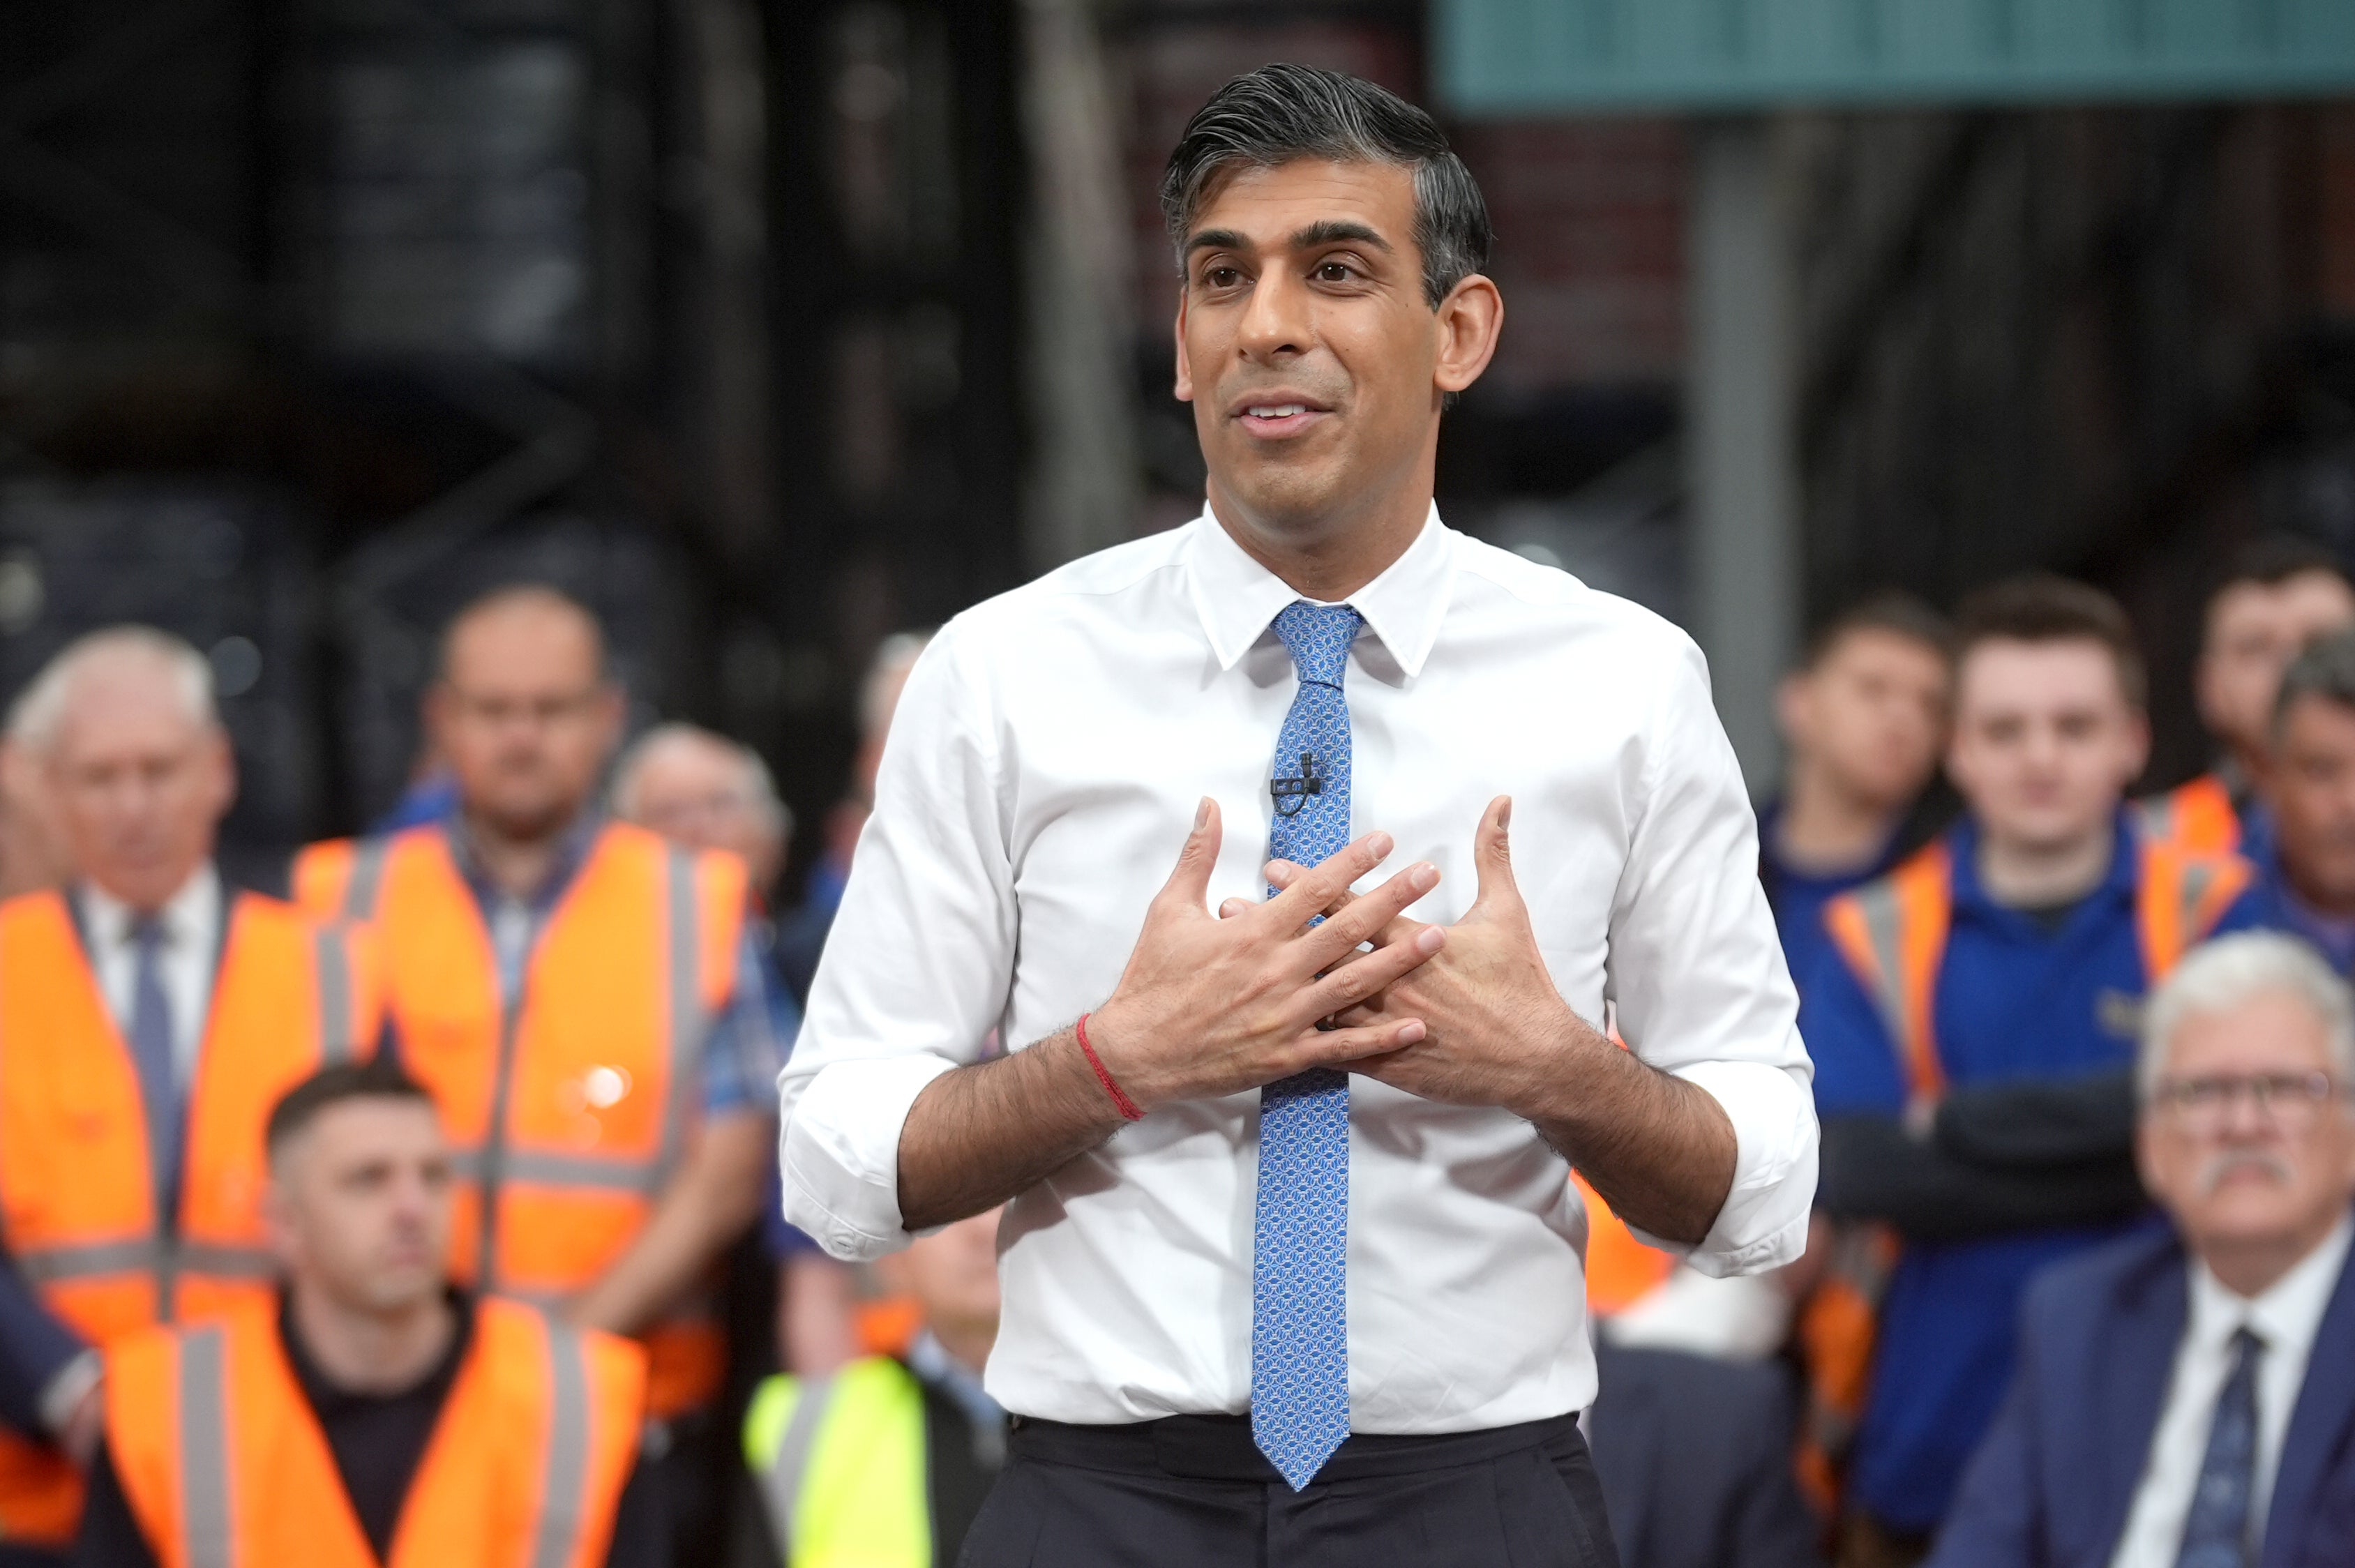 rishi sunak, poll, tories, labour, voters, ’bleak’ outlook for tories as they hit new poll low after sunak called snap election